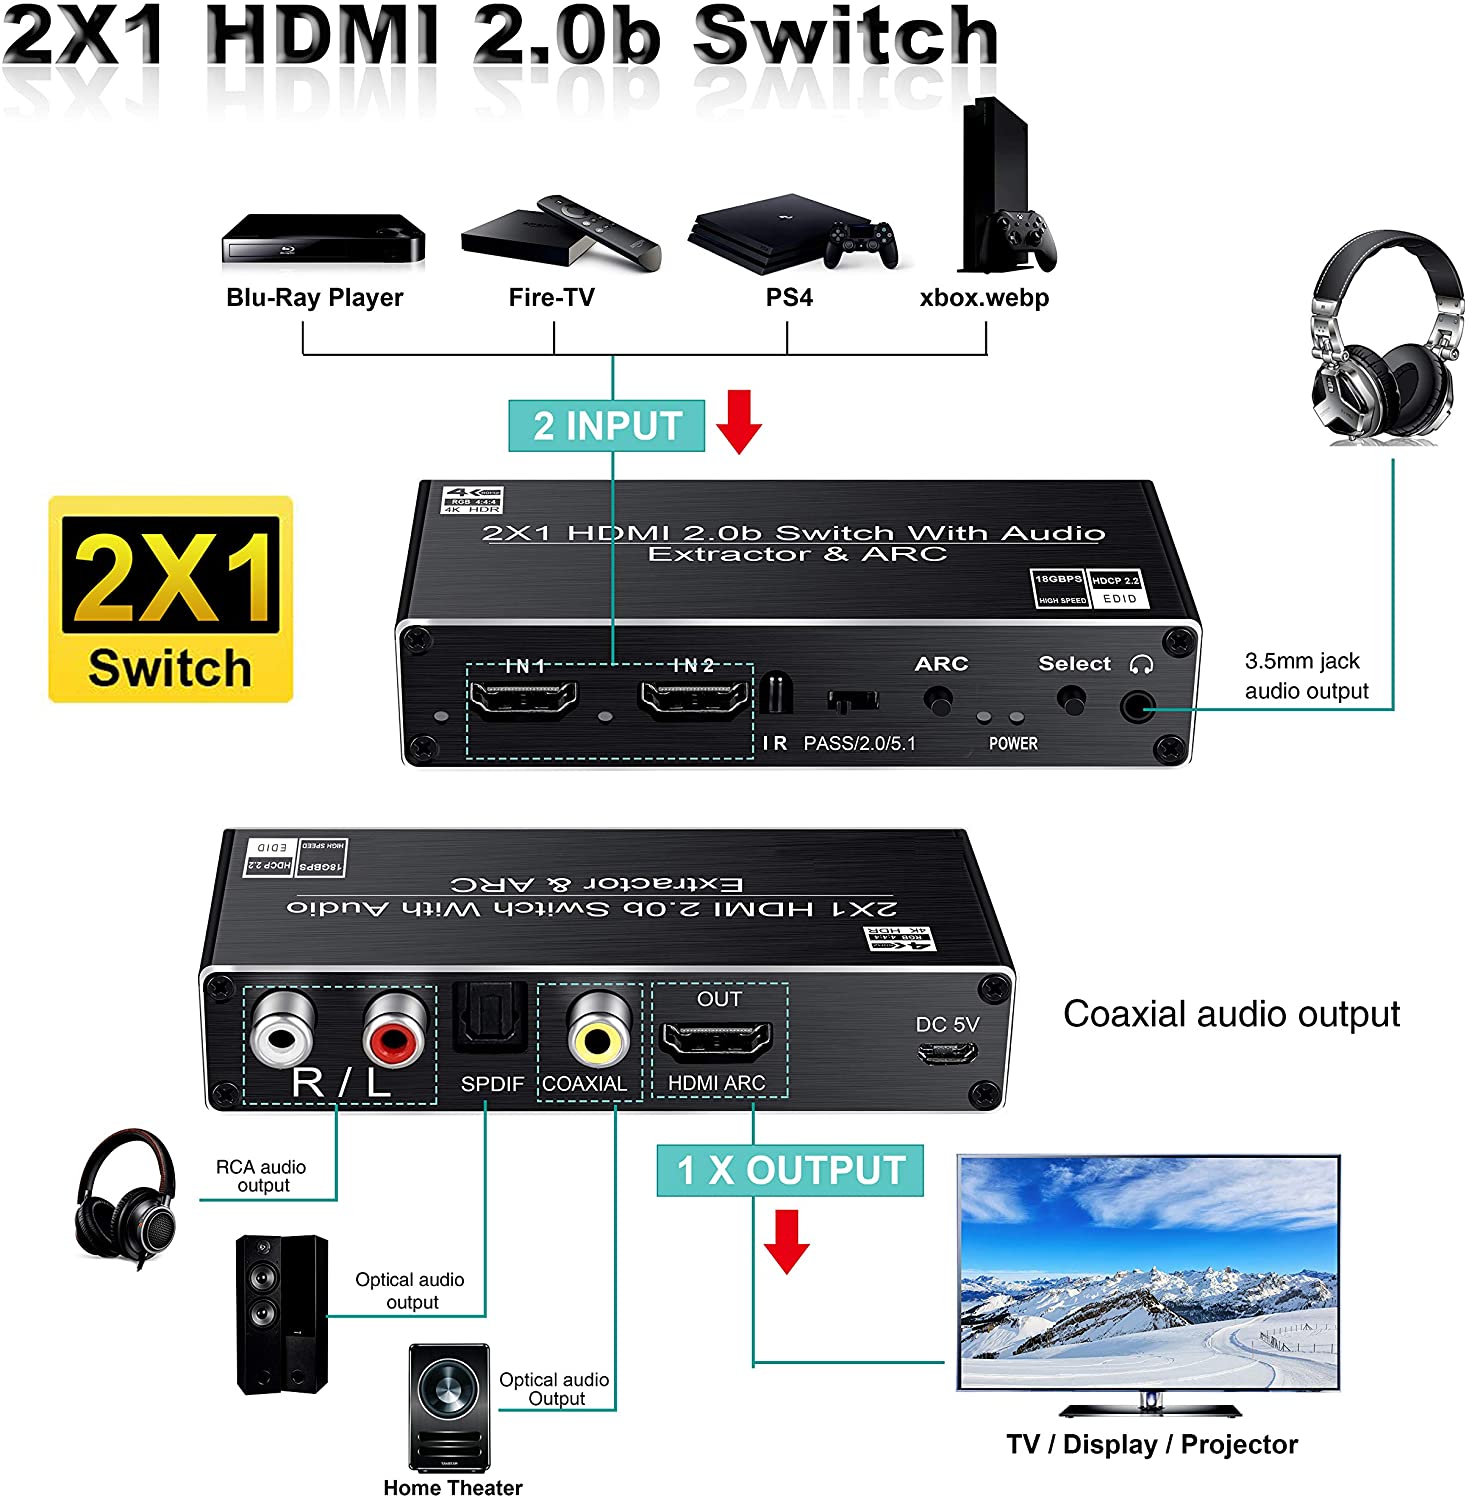 4K HDMI Switcher 5X1 audio extractor splitter HDMI 5 in 1 out+toslink audio&L/R